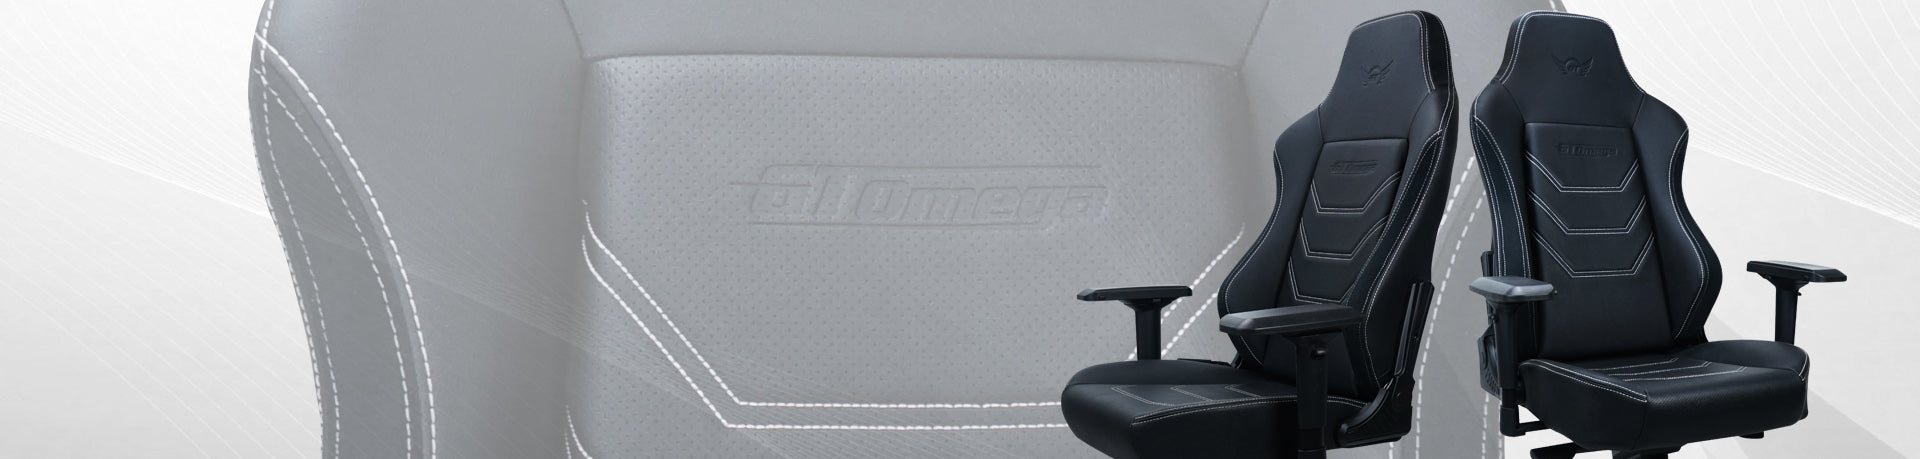 GT Omega Element Series Gaming Chair